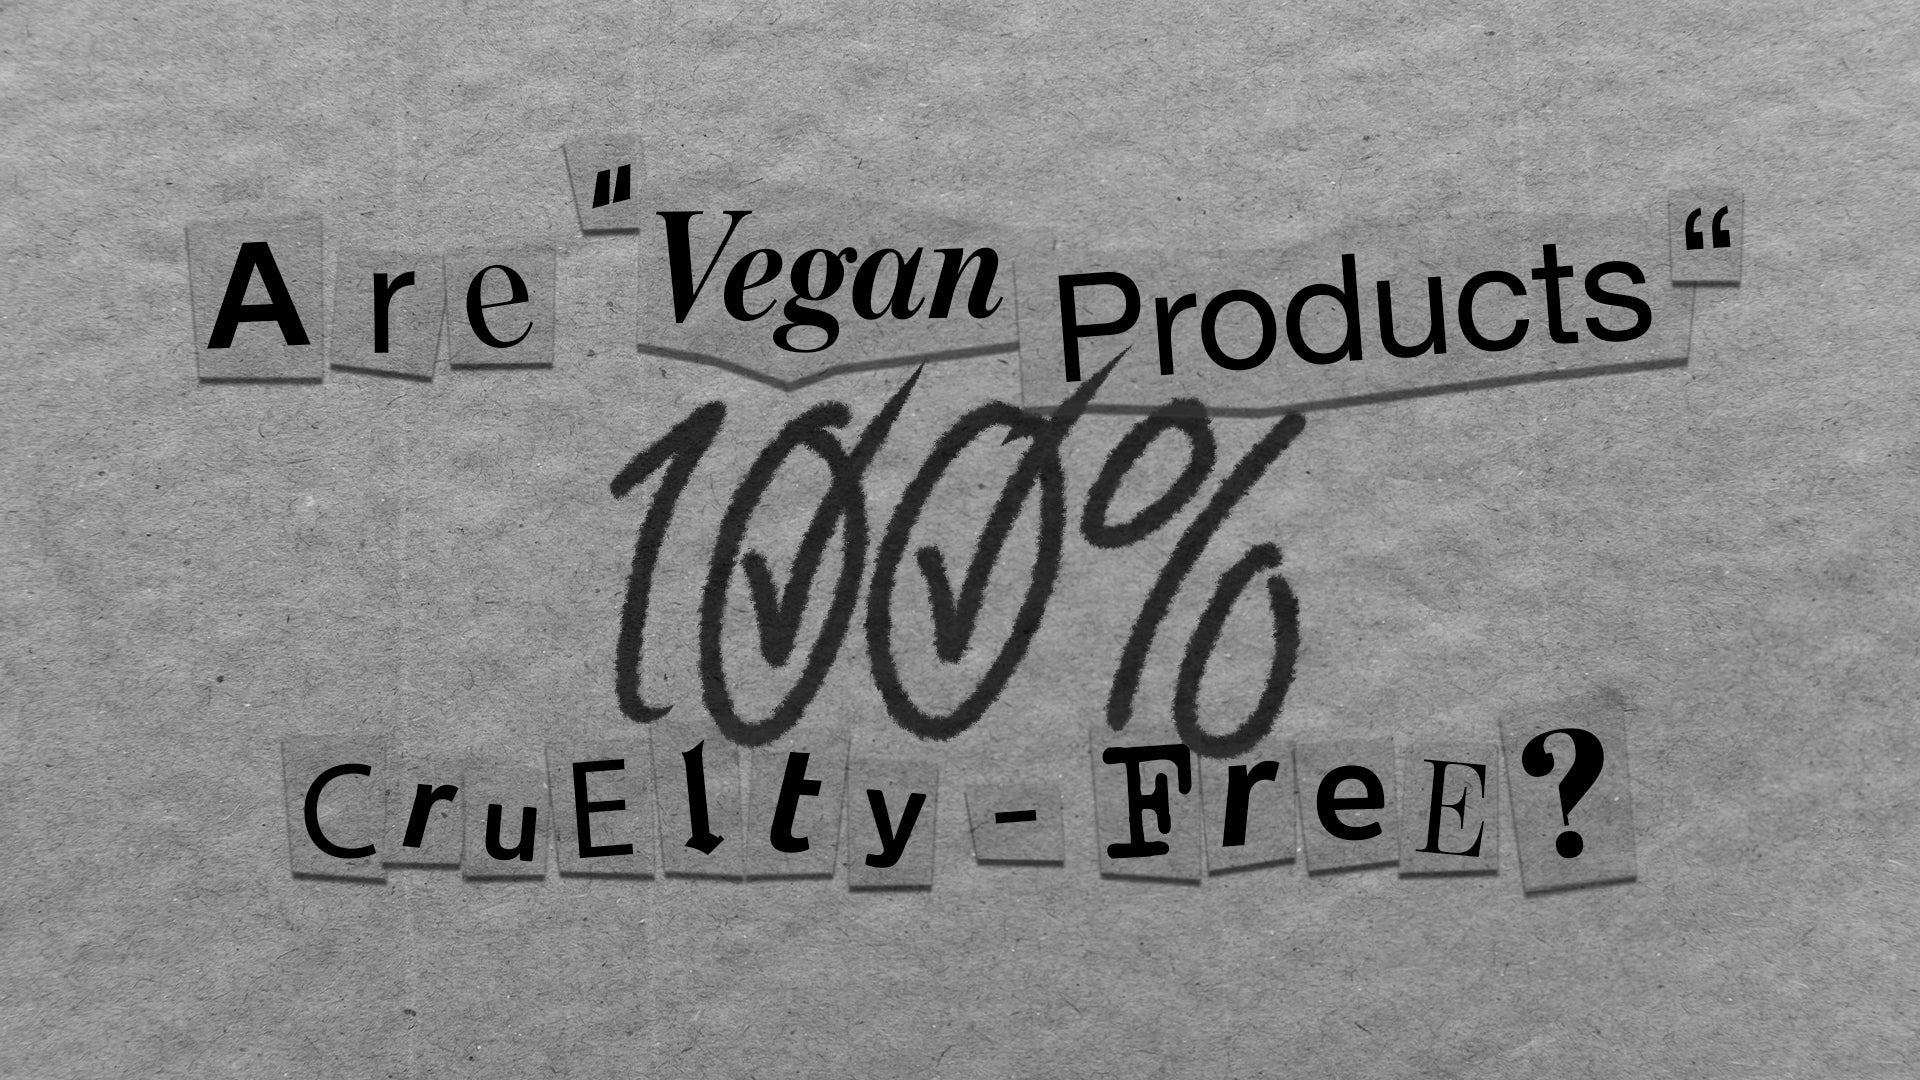 ARE VEGAN PRODUCTS 100% CRUELTY-FREE? - prev